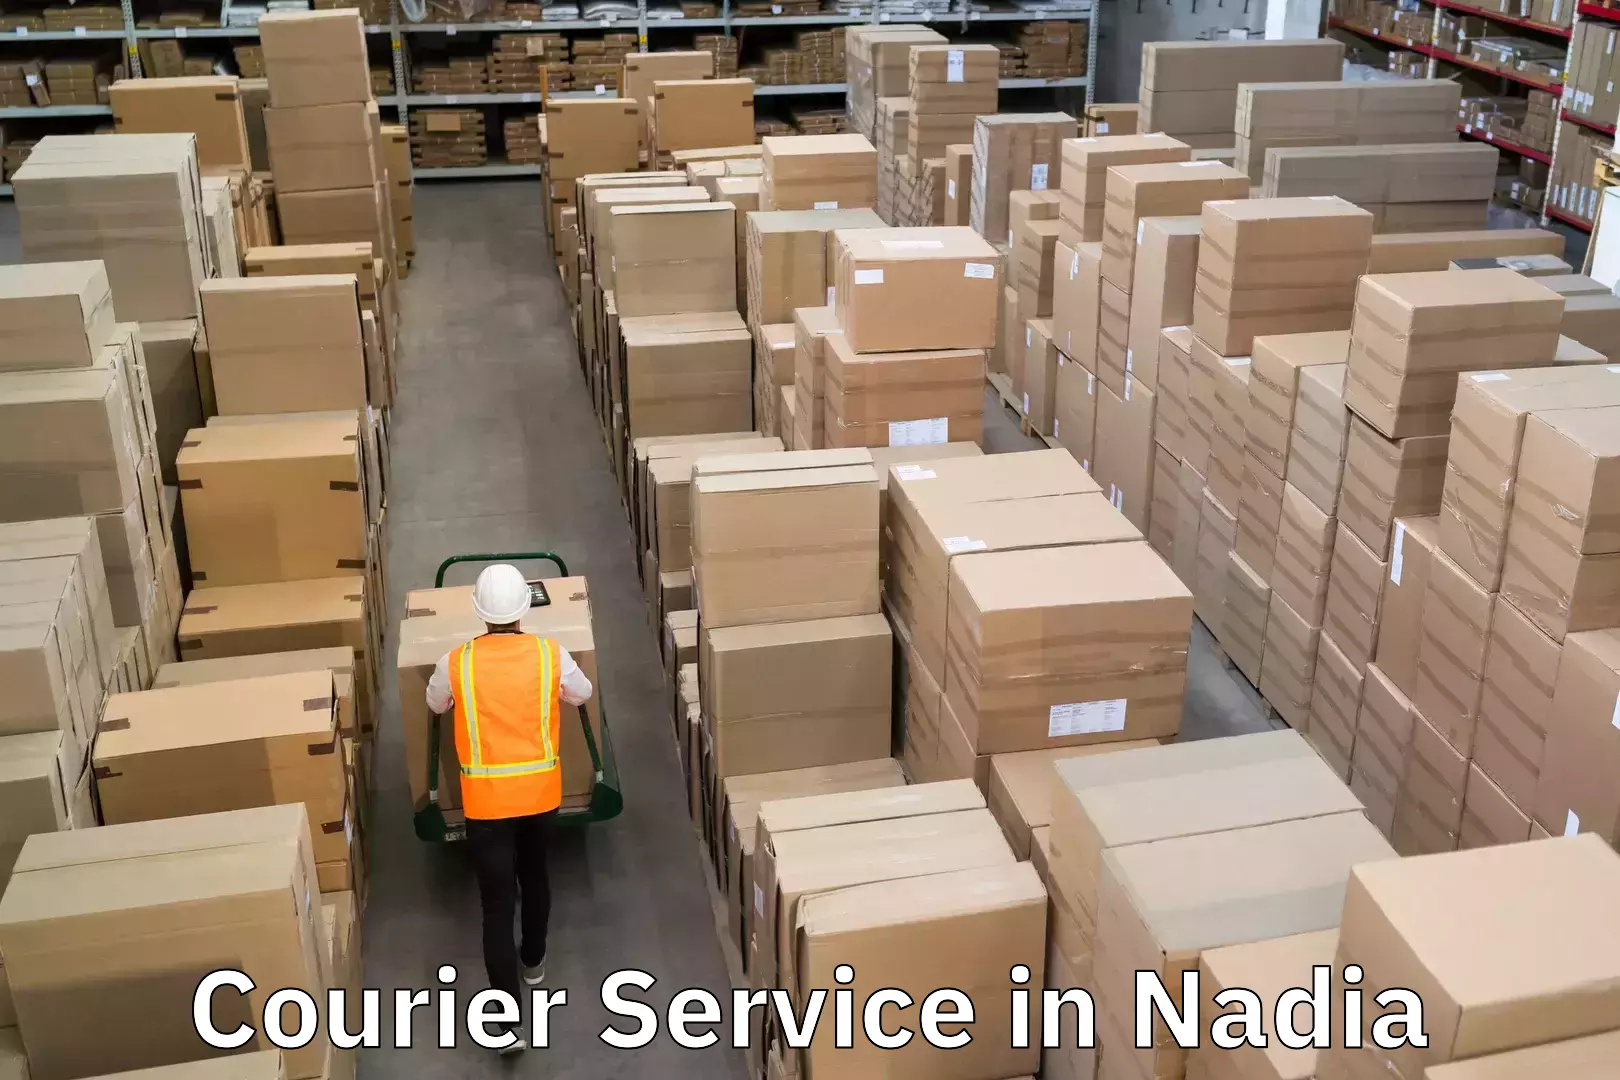 Local delivery service in Nadia